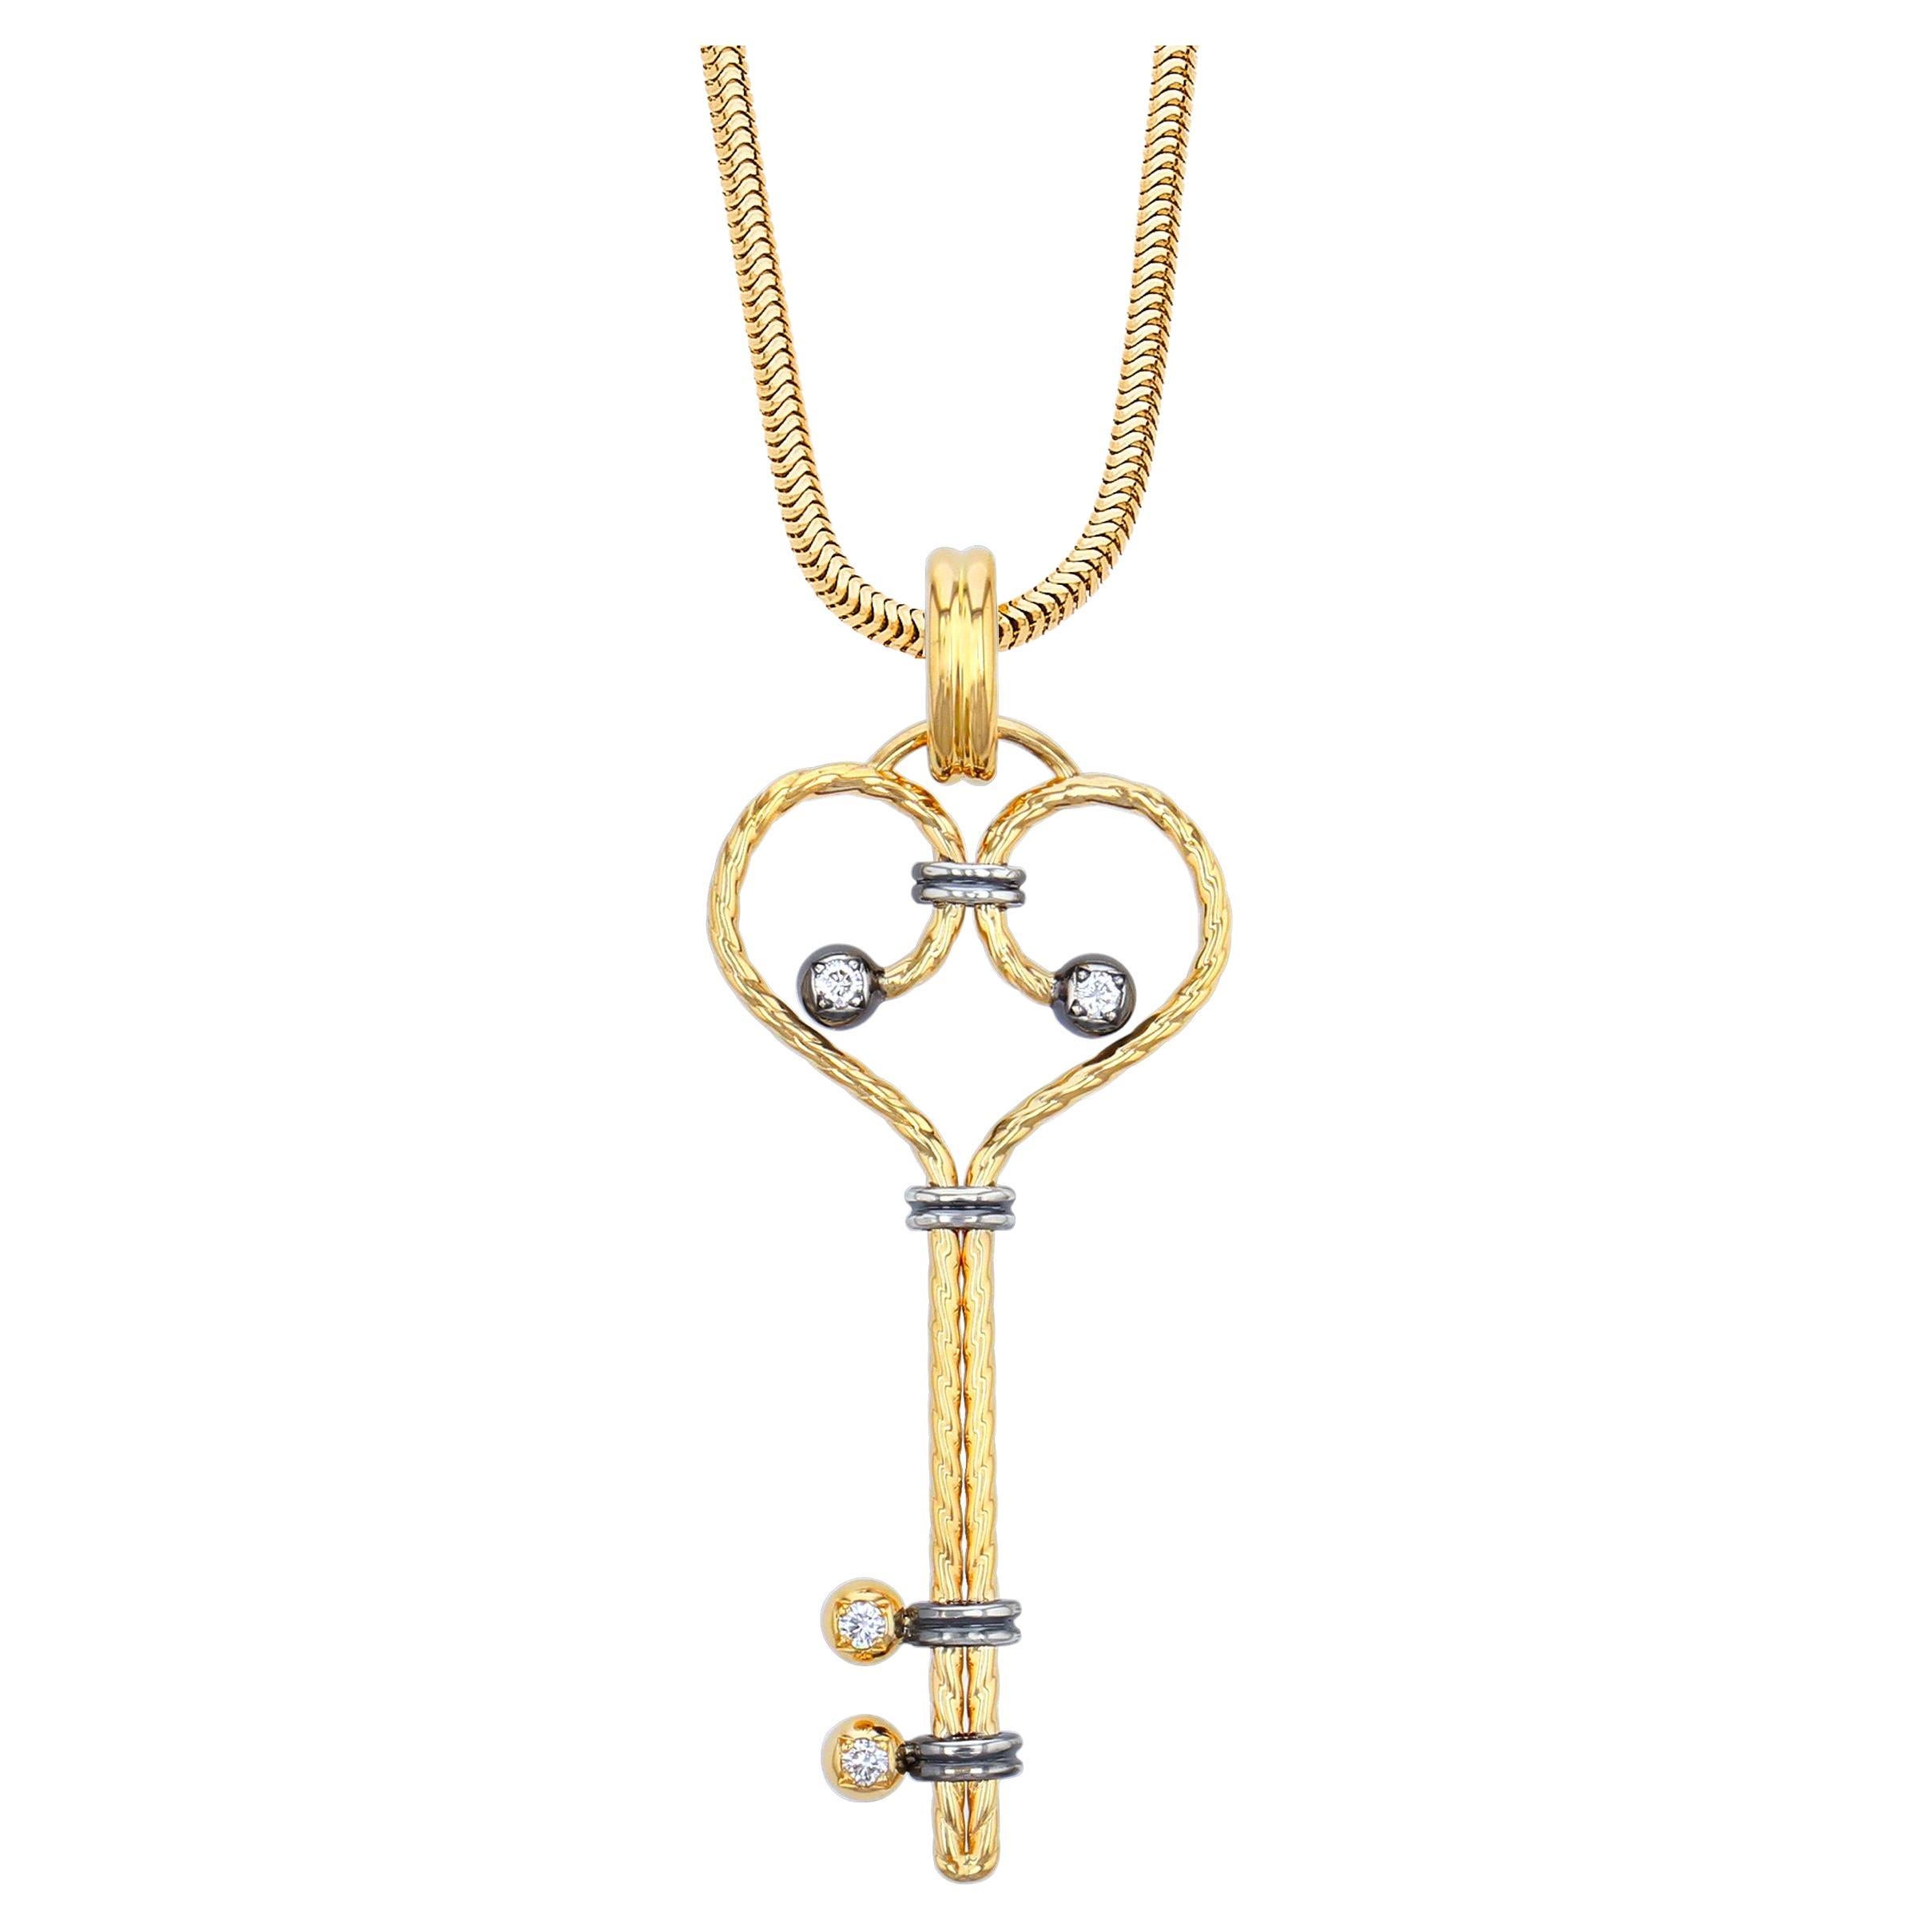 Diamond & Gold Clef Twist Charm by Elie Top For Sale